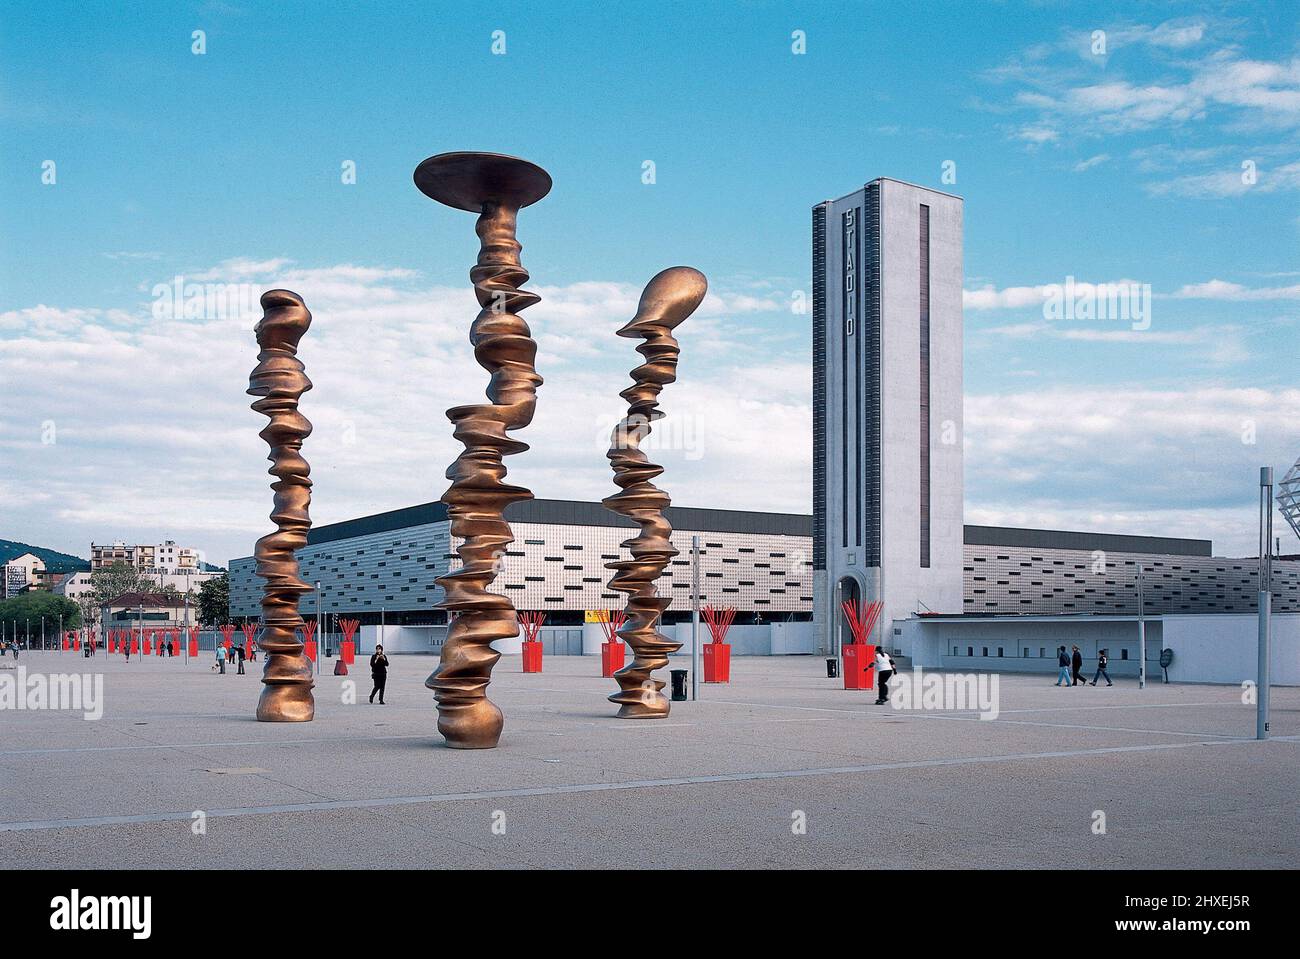 Torino, Italy - January 2006: Tony Cragg's sculpture 'Points of View' in the Olympic square in Turin Stock Photo